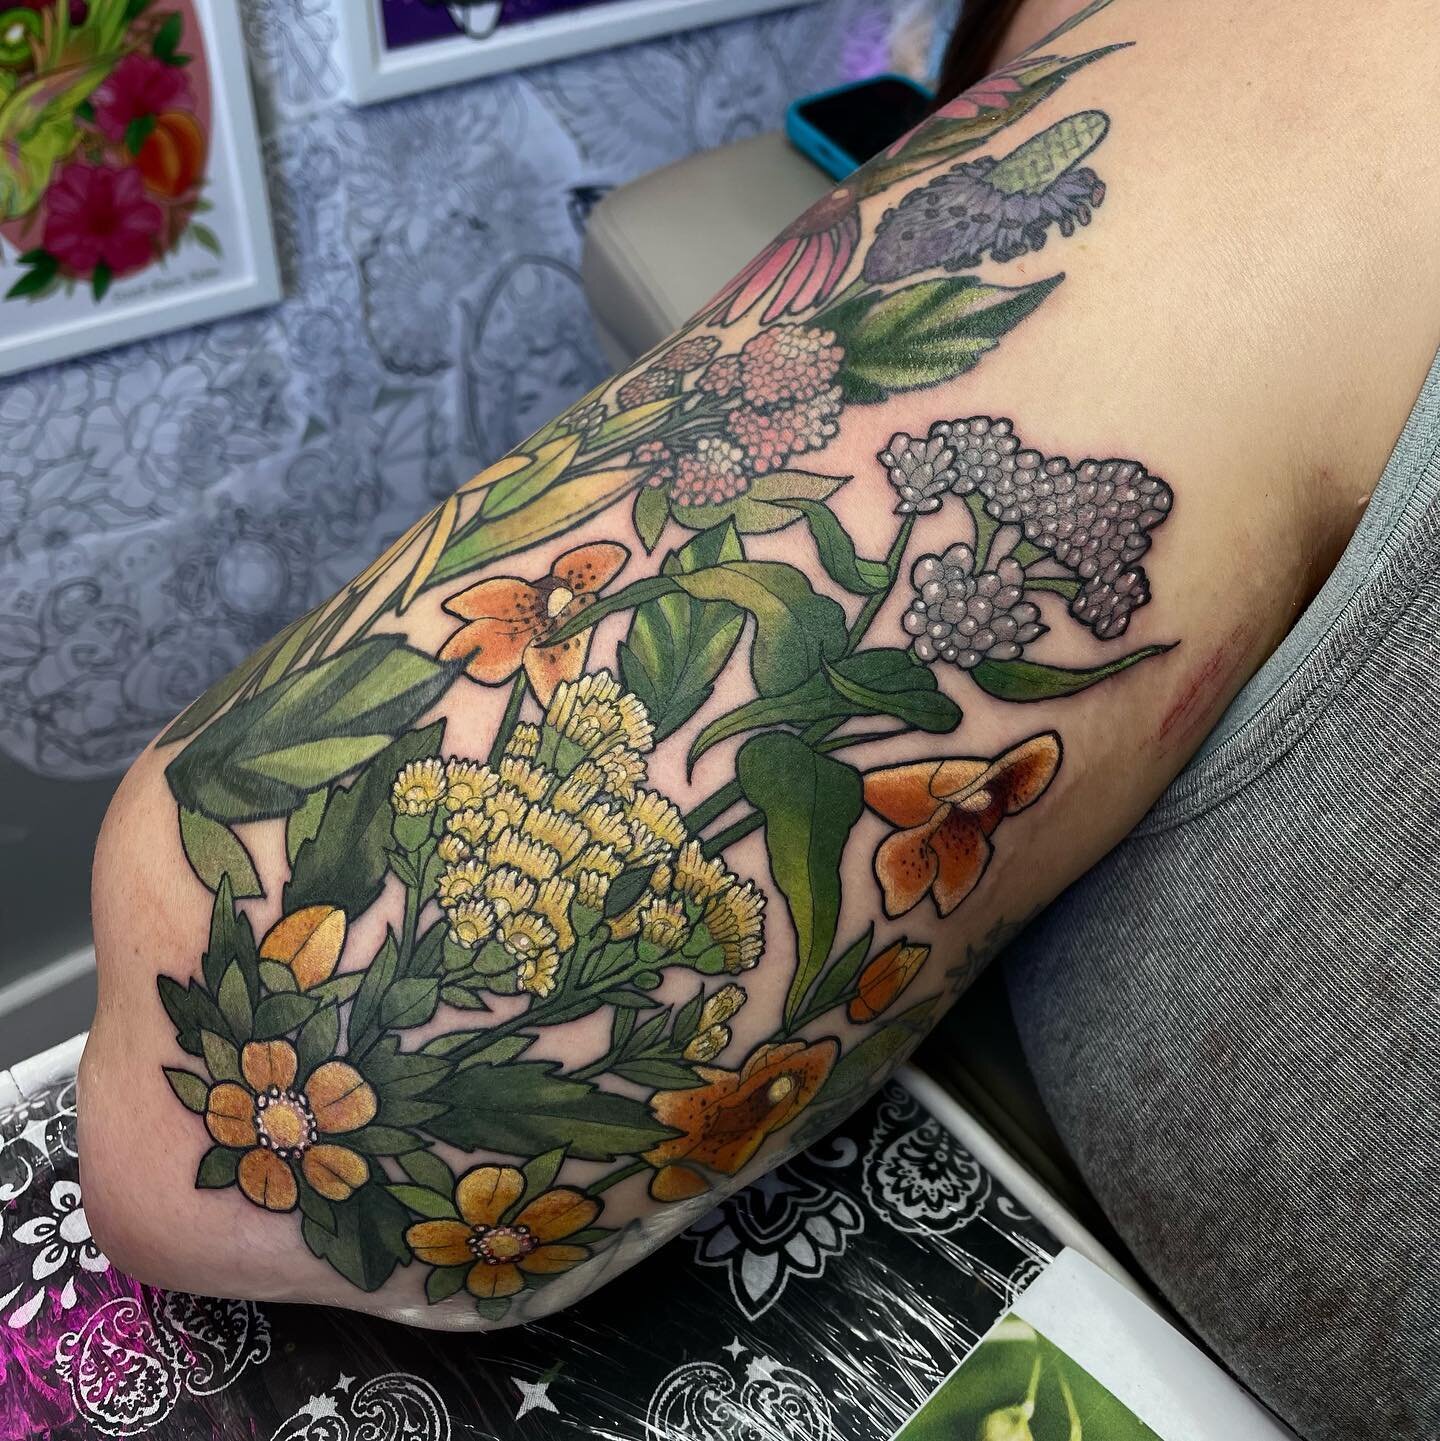 Full wrap around half sleeve of Minnesota native flowers 🌸 one more session to go
.
.
.
#tattoo #tattoos #ink #halfsleeve #floral #flower #floraltattoo #minnesotaflowers #wildflowers #sleeve @saniderm @ttechofficial @eternalink